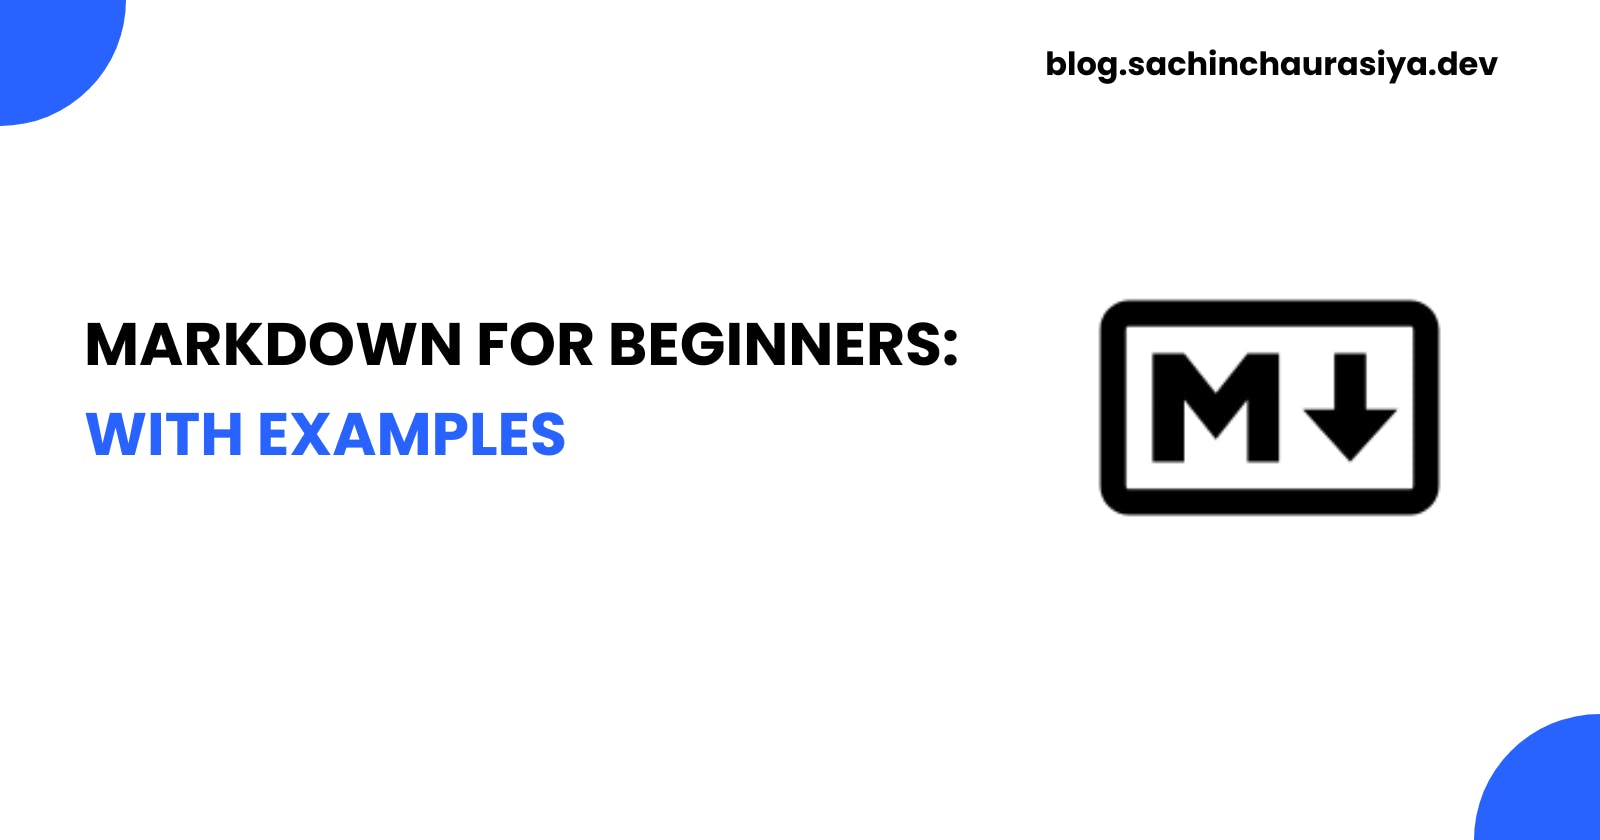 Markdown for beginners: with examples